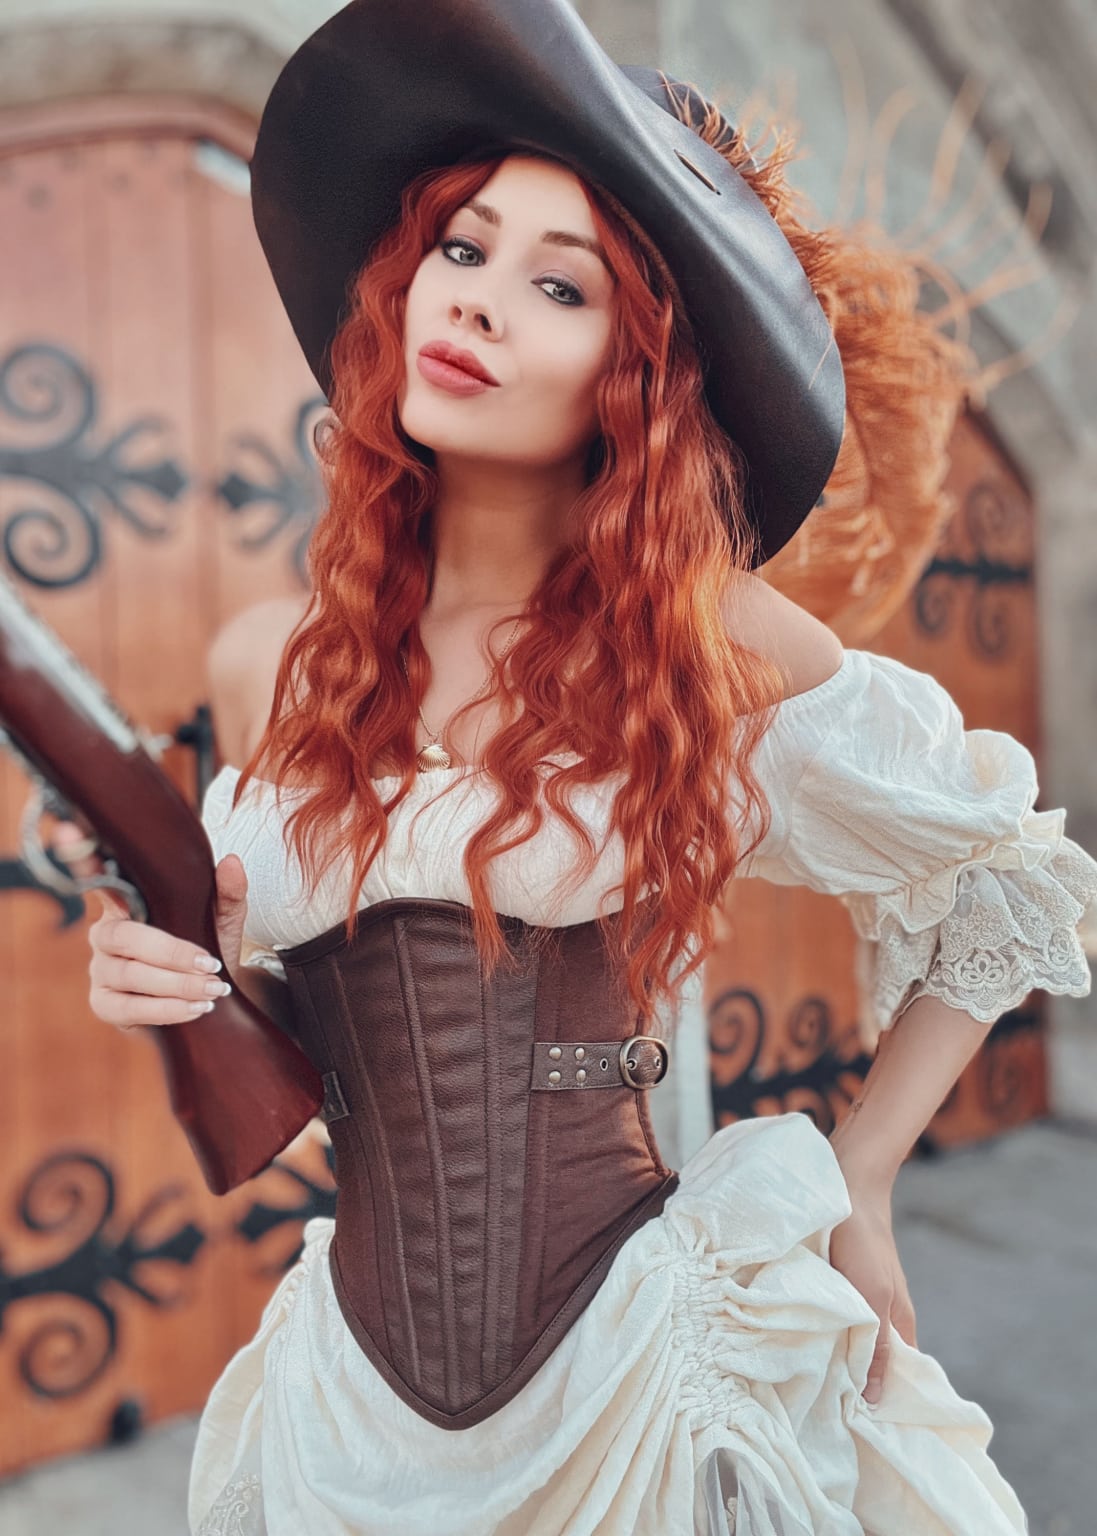 Waist Training Part One: What, Why, How? — Of Corsets and Cosplay